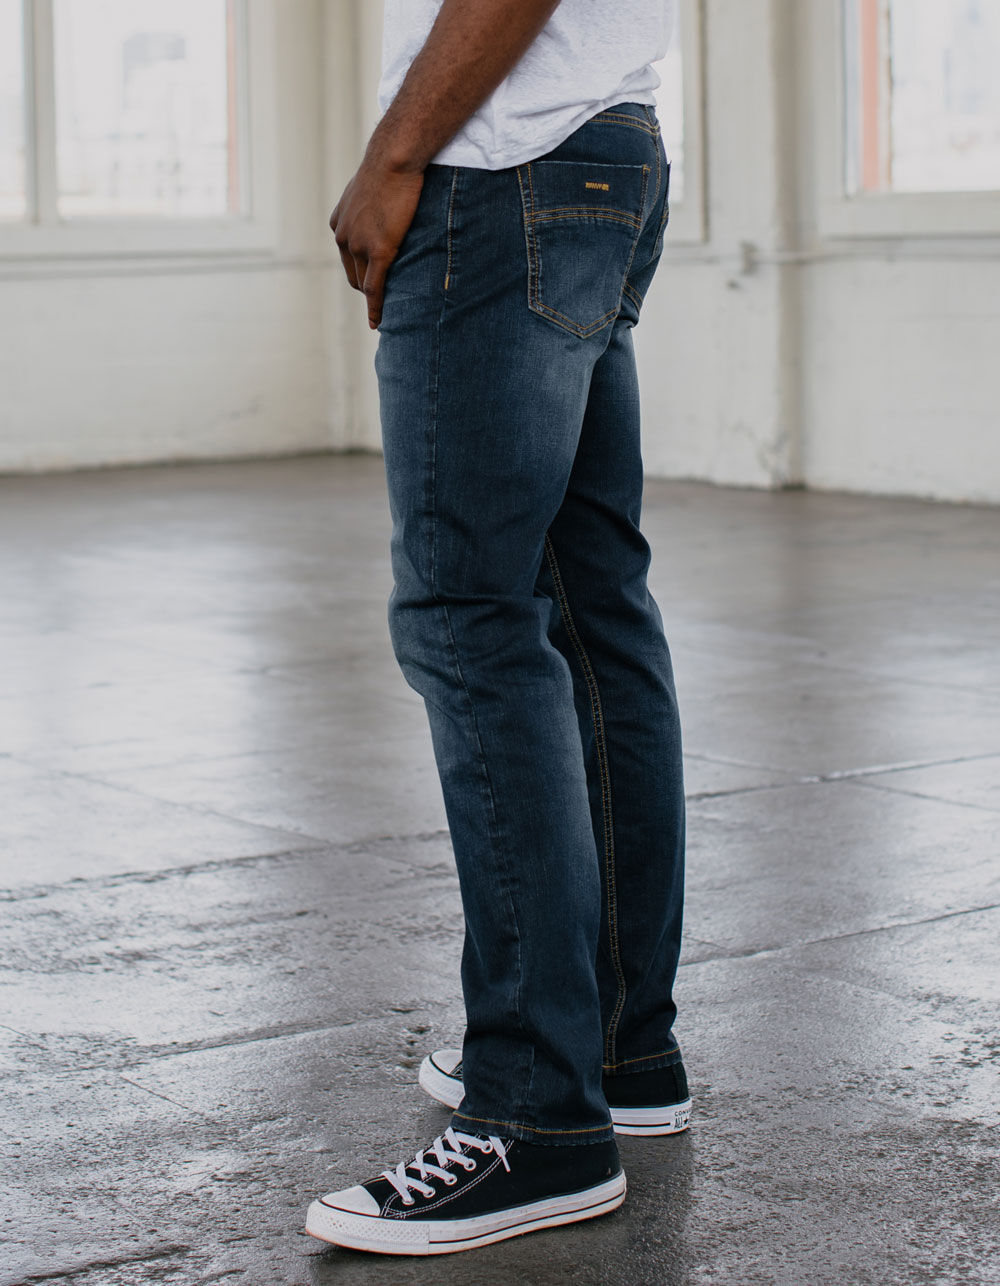 Tillys: RSQ Jeans (London Skinny) review 